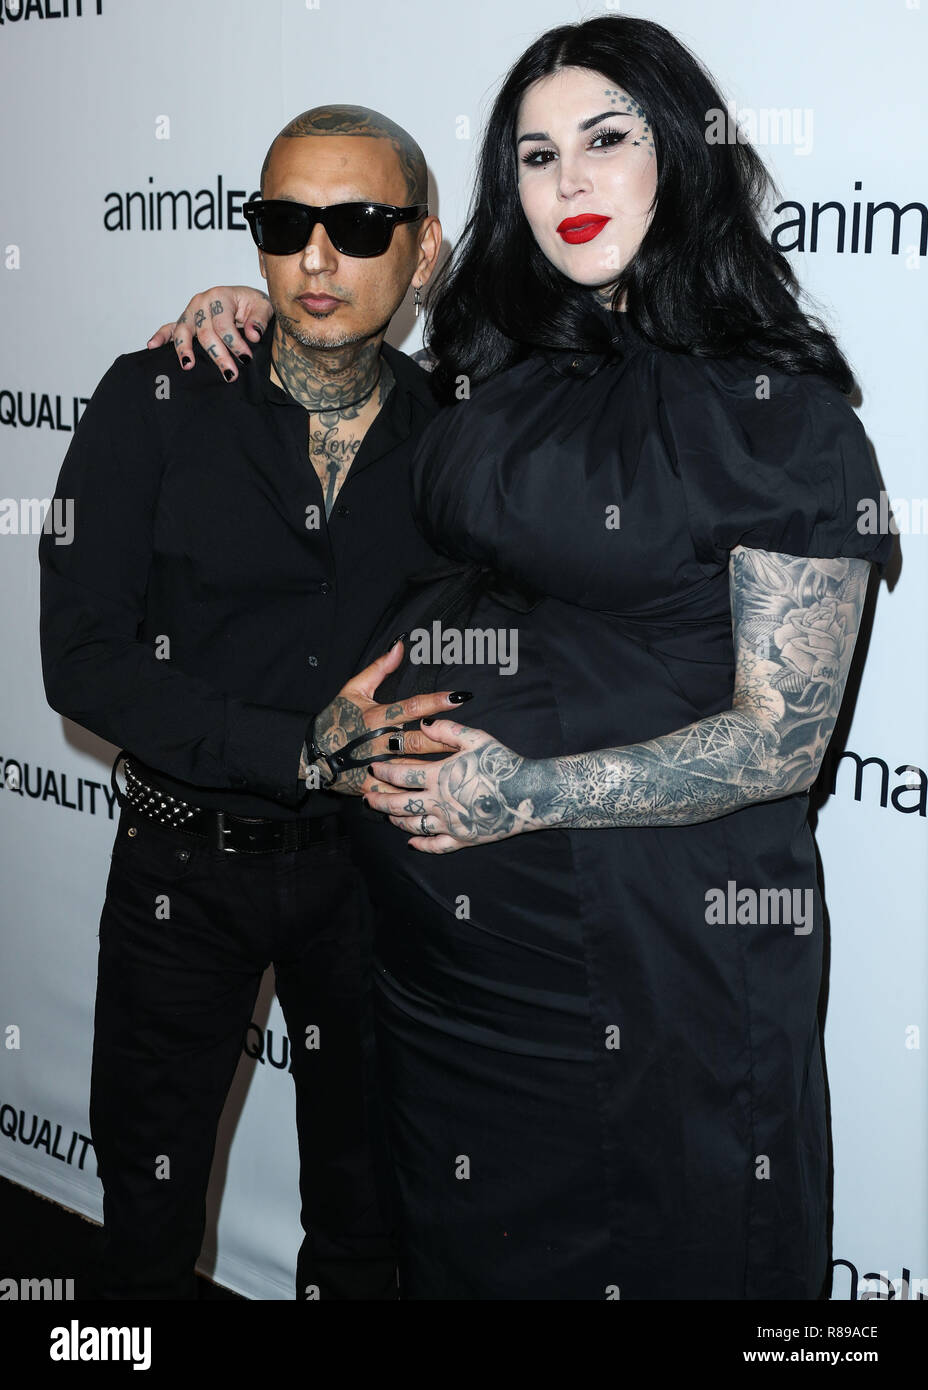 BEVERLY HILLS, LOS ANGELES, CA, USA - OCTOBER 27: Rafael Reyes, Kat Von D  at the Animal Equality's Inspiring Global Action Los Angeles Gala 2018 held  at The Beverly Hilton Hotel on